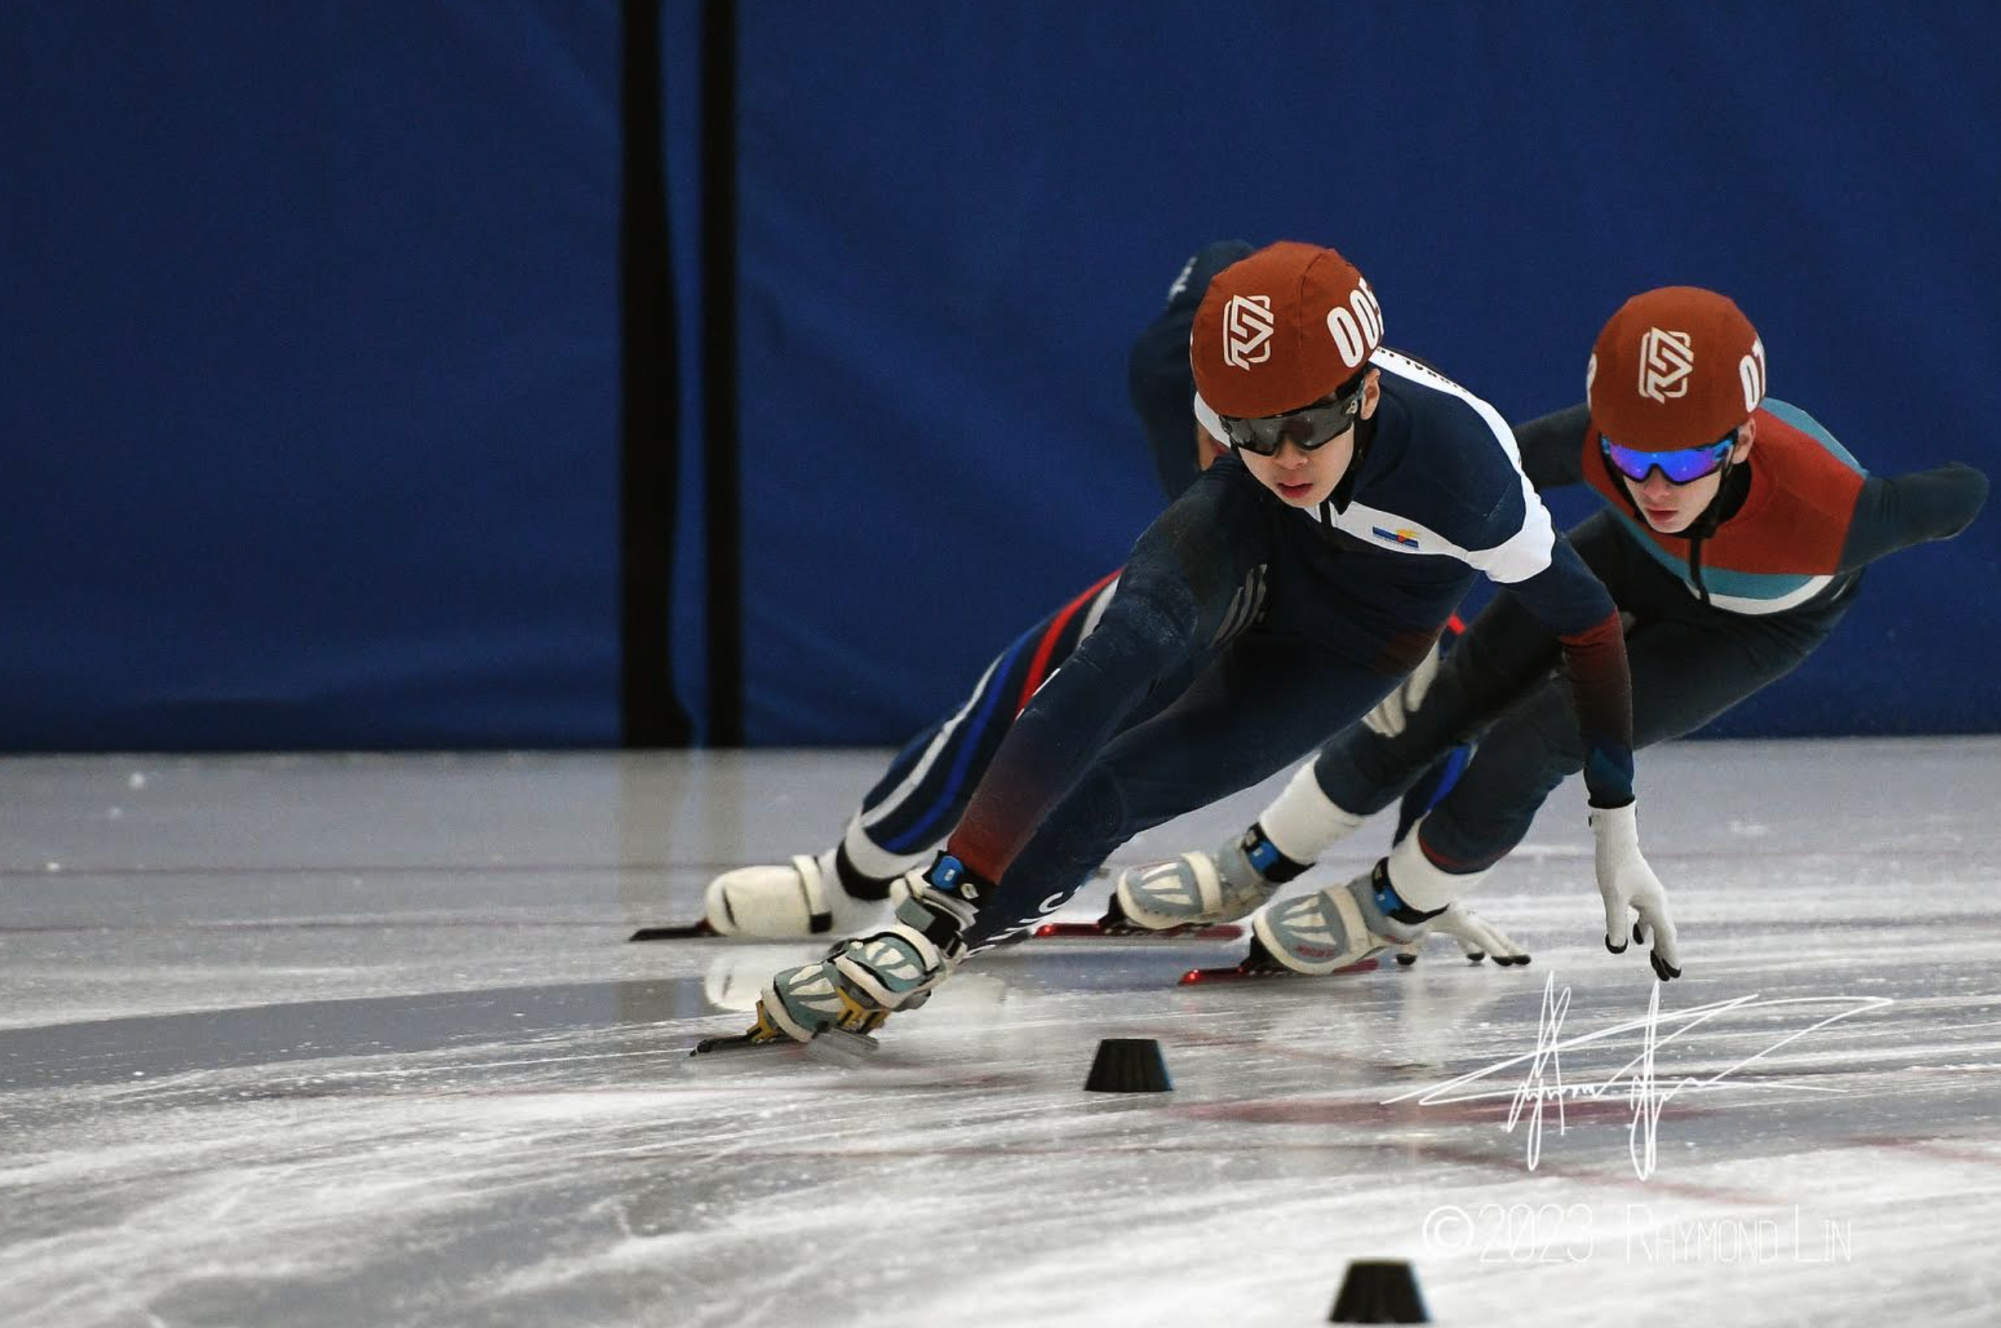 Brandon Liao, sophomore, competes at the US Short Track Speedskating National Age Group Championship in Milwaukee.